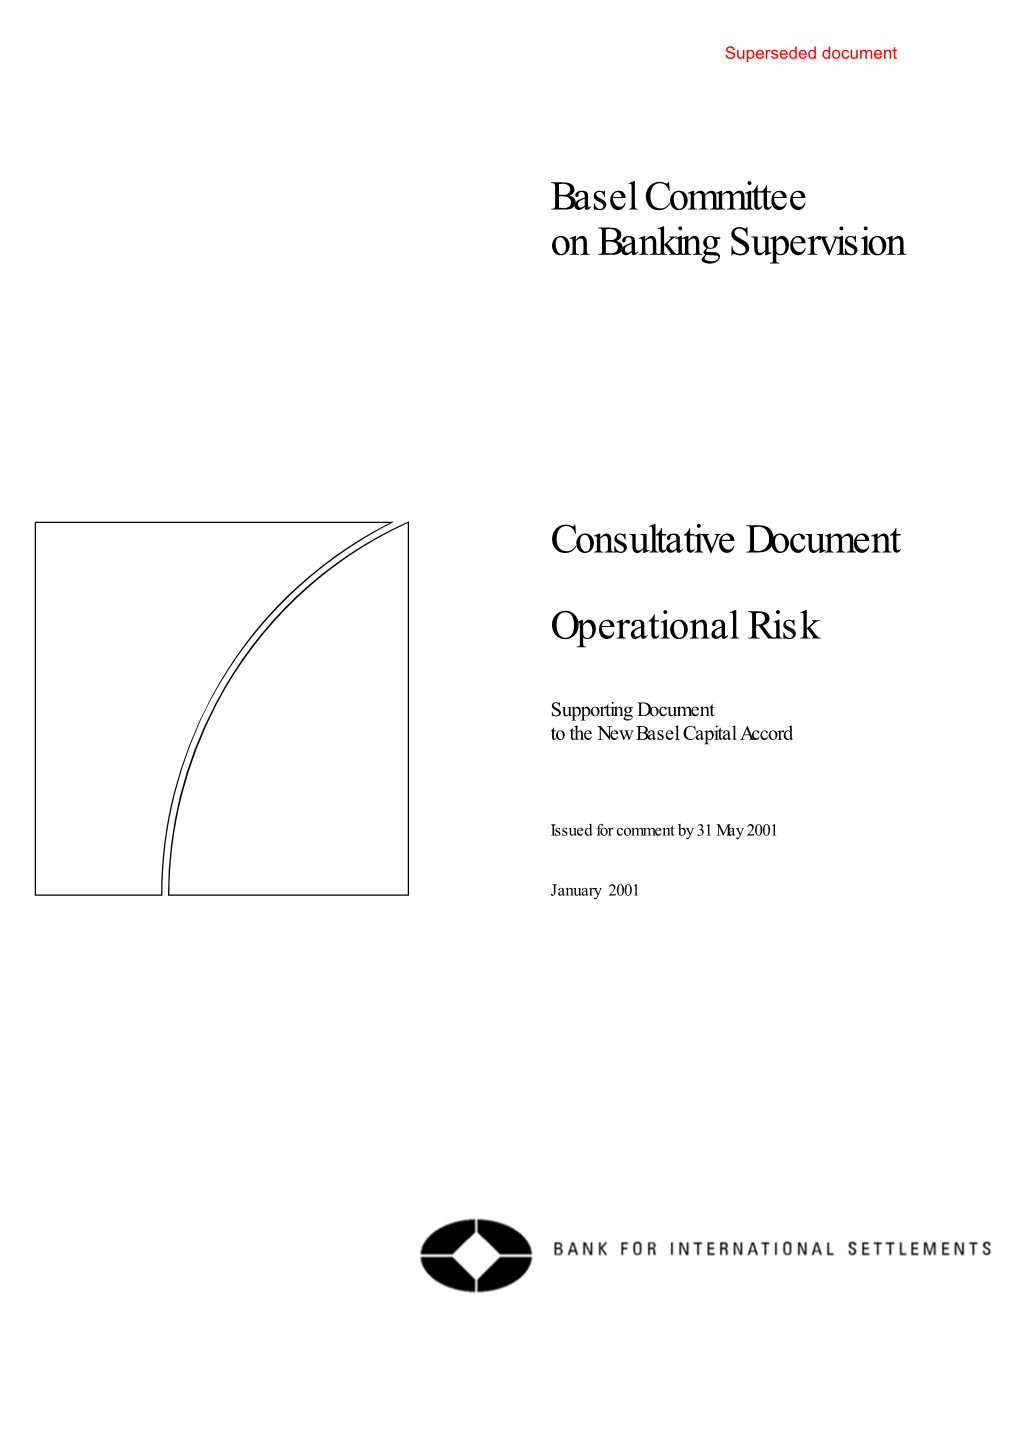 Consultative Document on Operational Risk